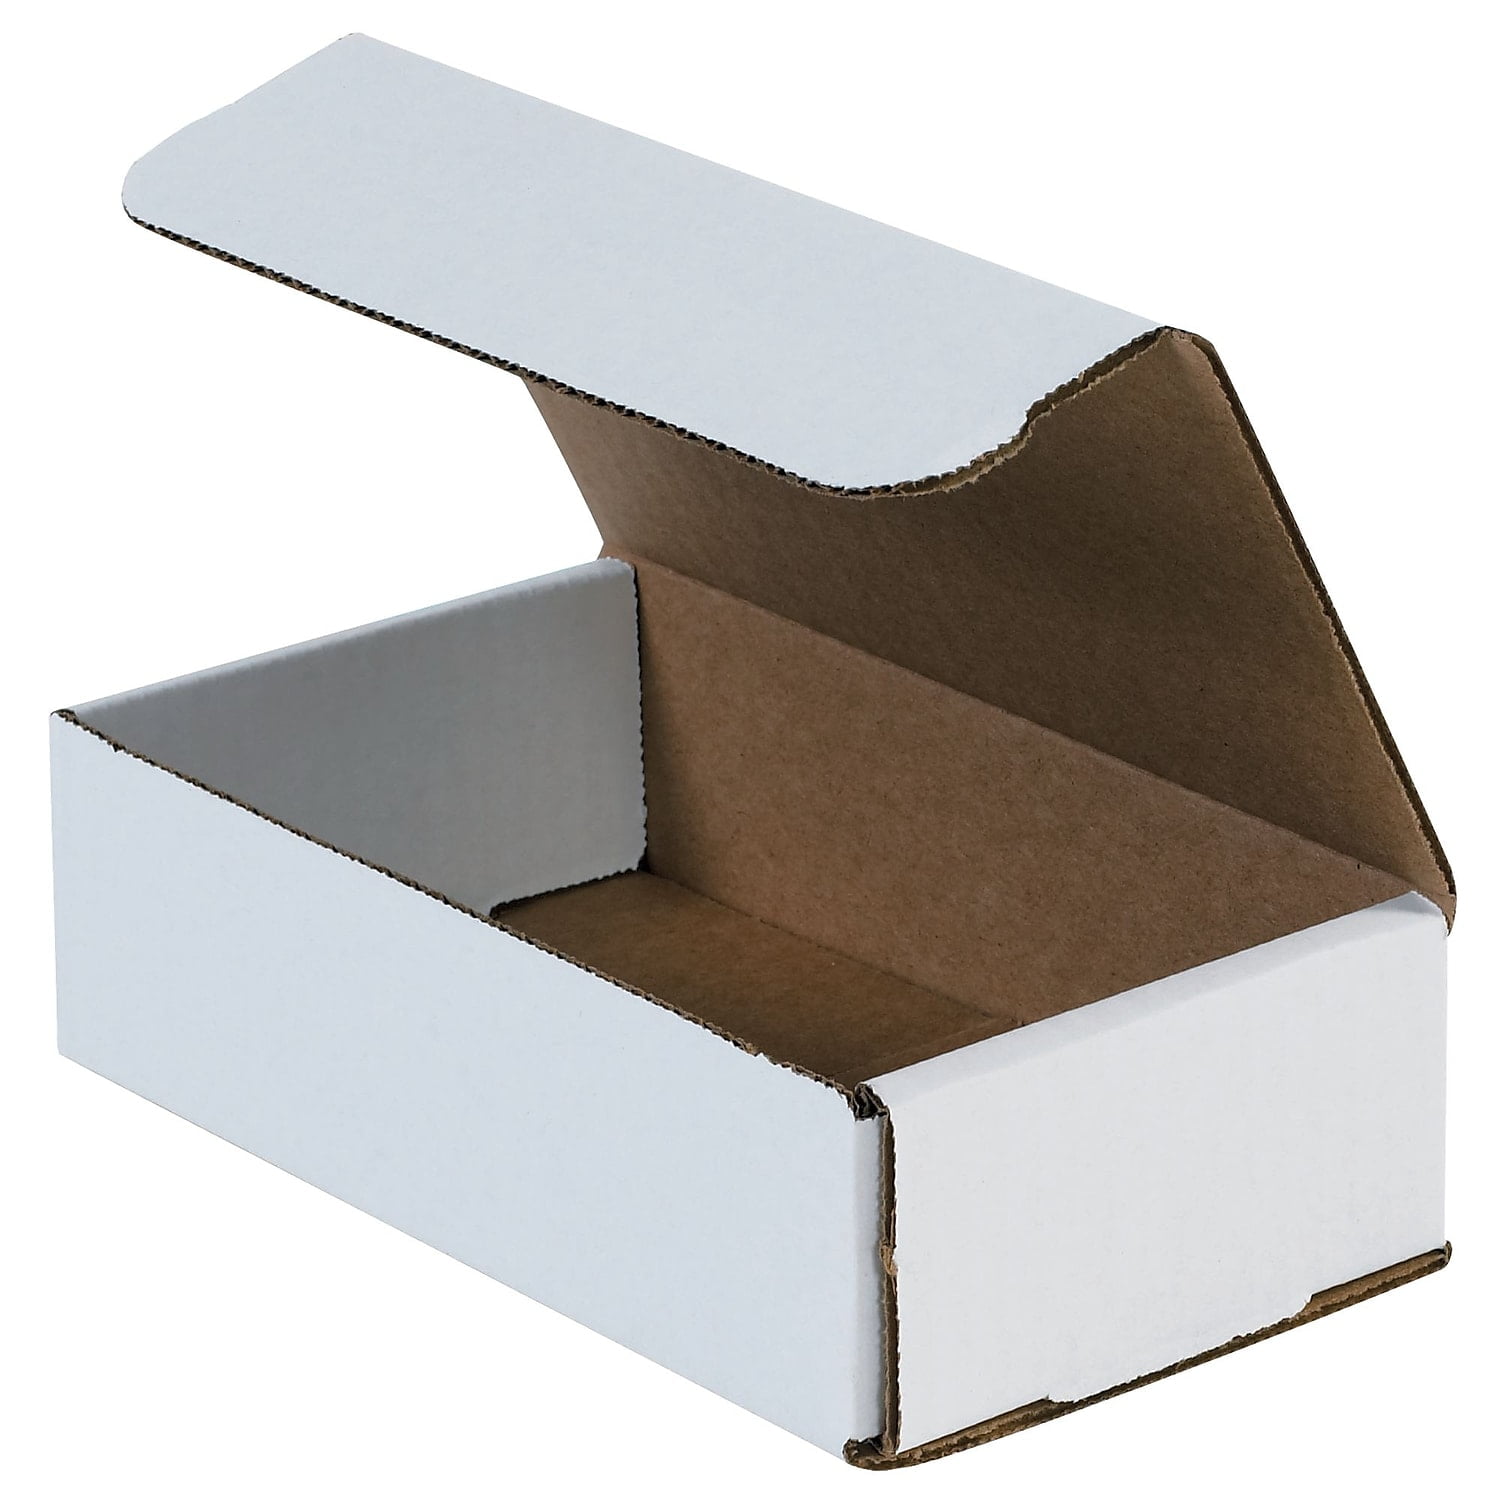 200  White Corrugated Cardboard  Pizza  Style Boxes 15.5 x 15.5 x 2.25" 